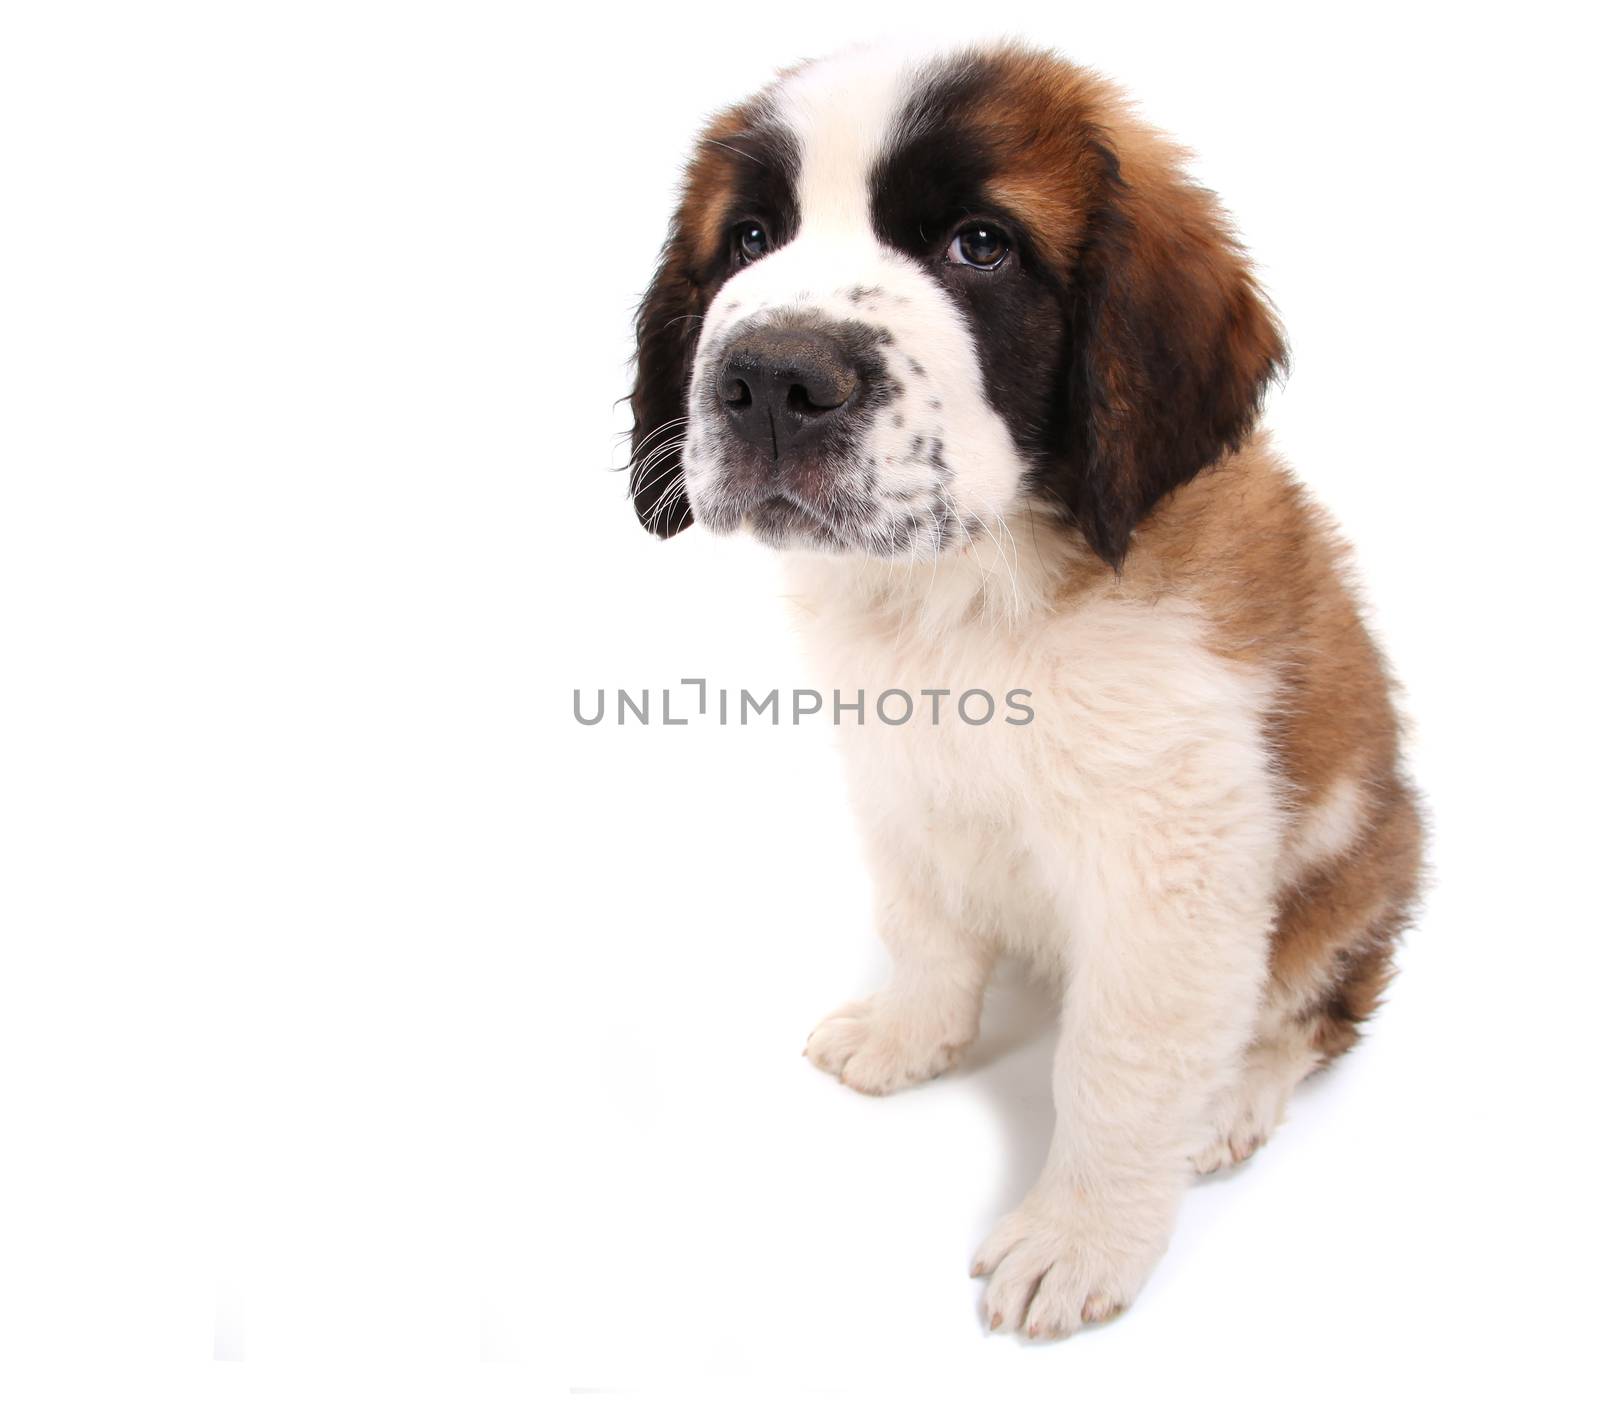 Puppy Looking Cute and Sad on White Background Sitting Sideways by tobkatrina